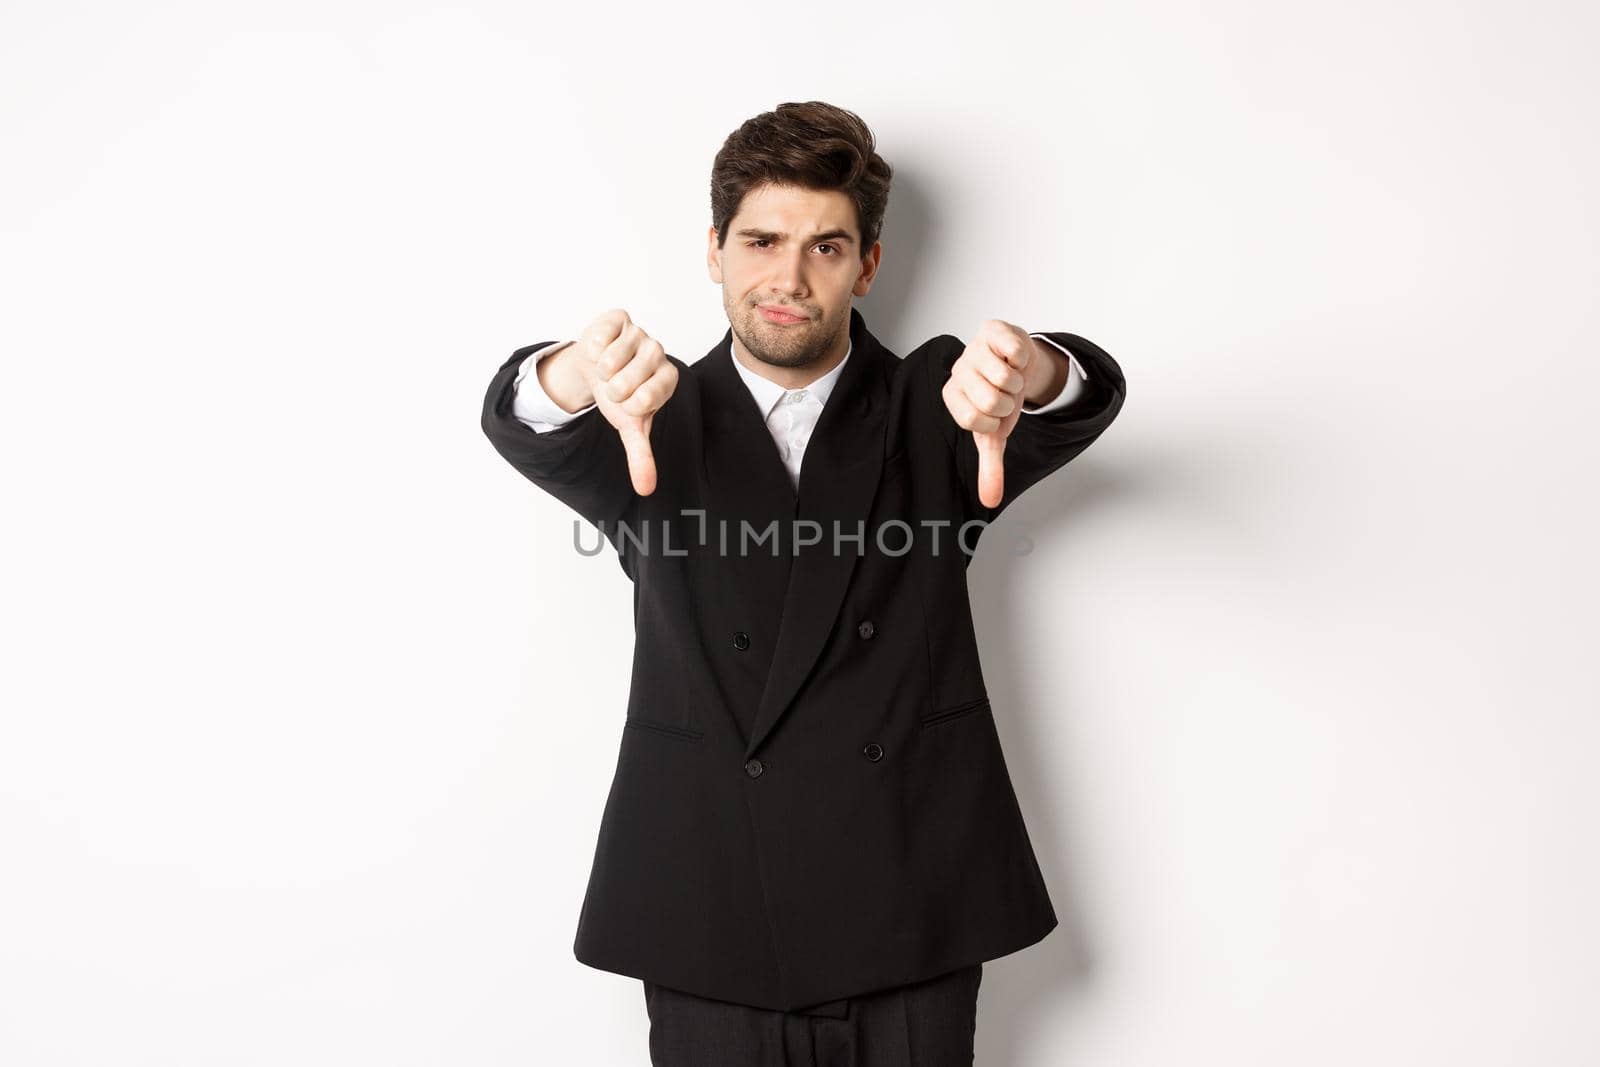 Portrait of skeptical and disappointed man in black suit, frowning upset, showing thumbs-down, dislike something bad, standing over white background.